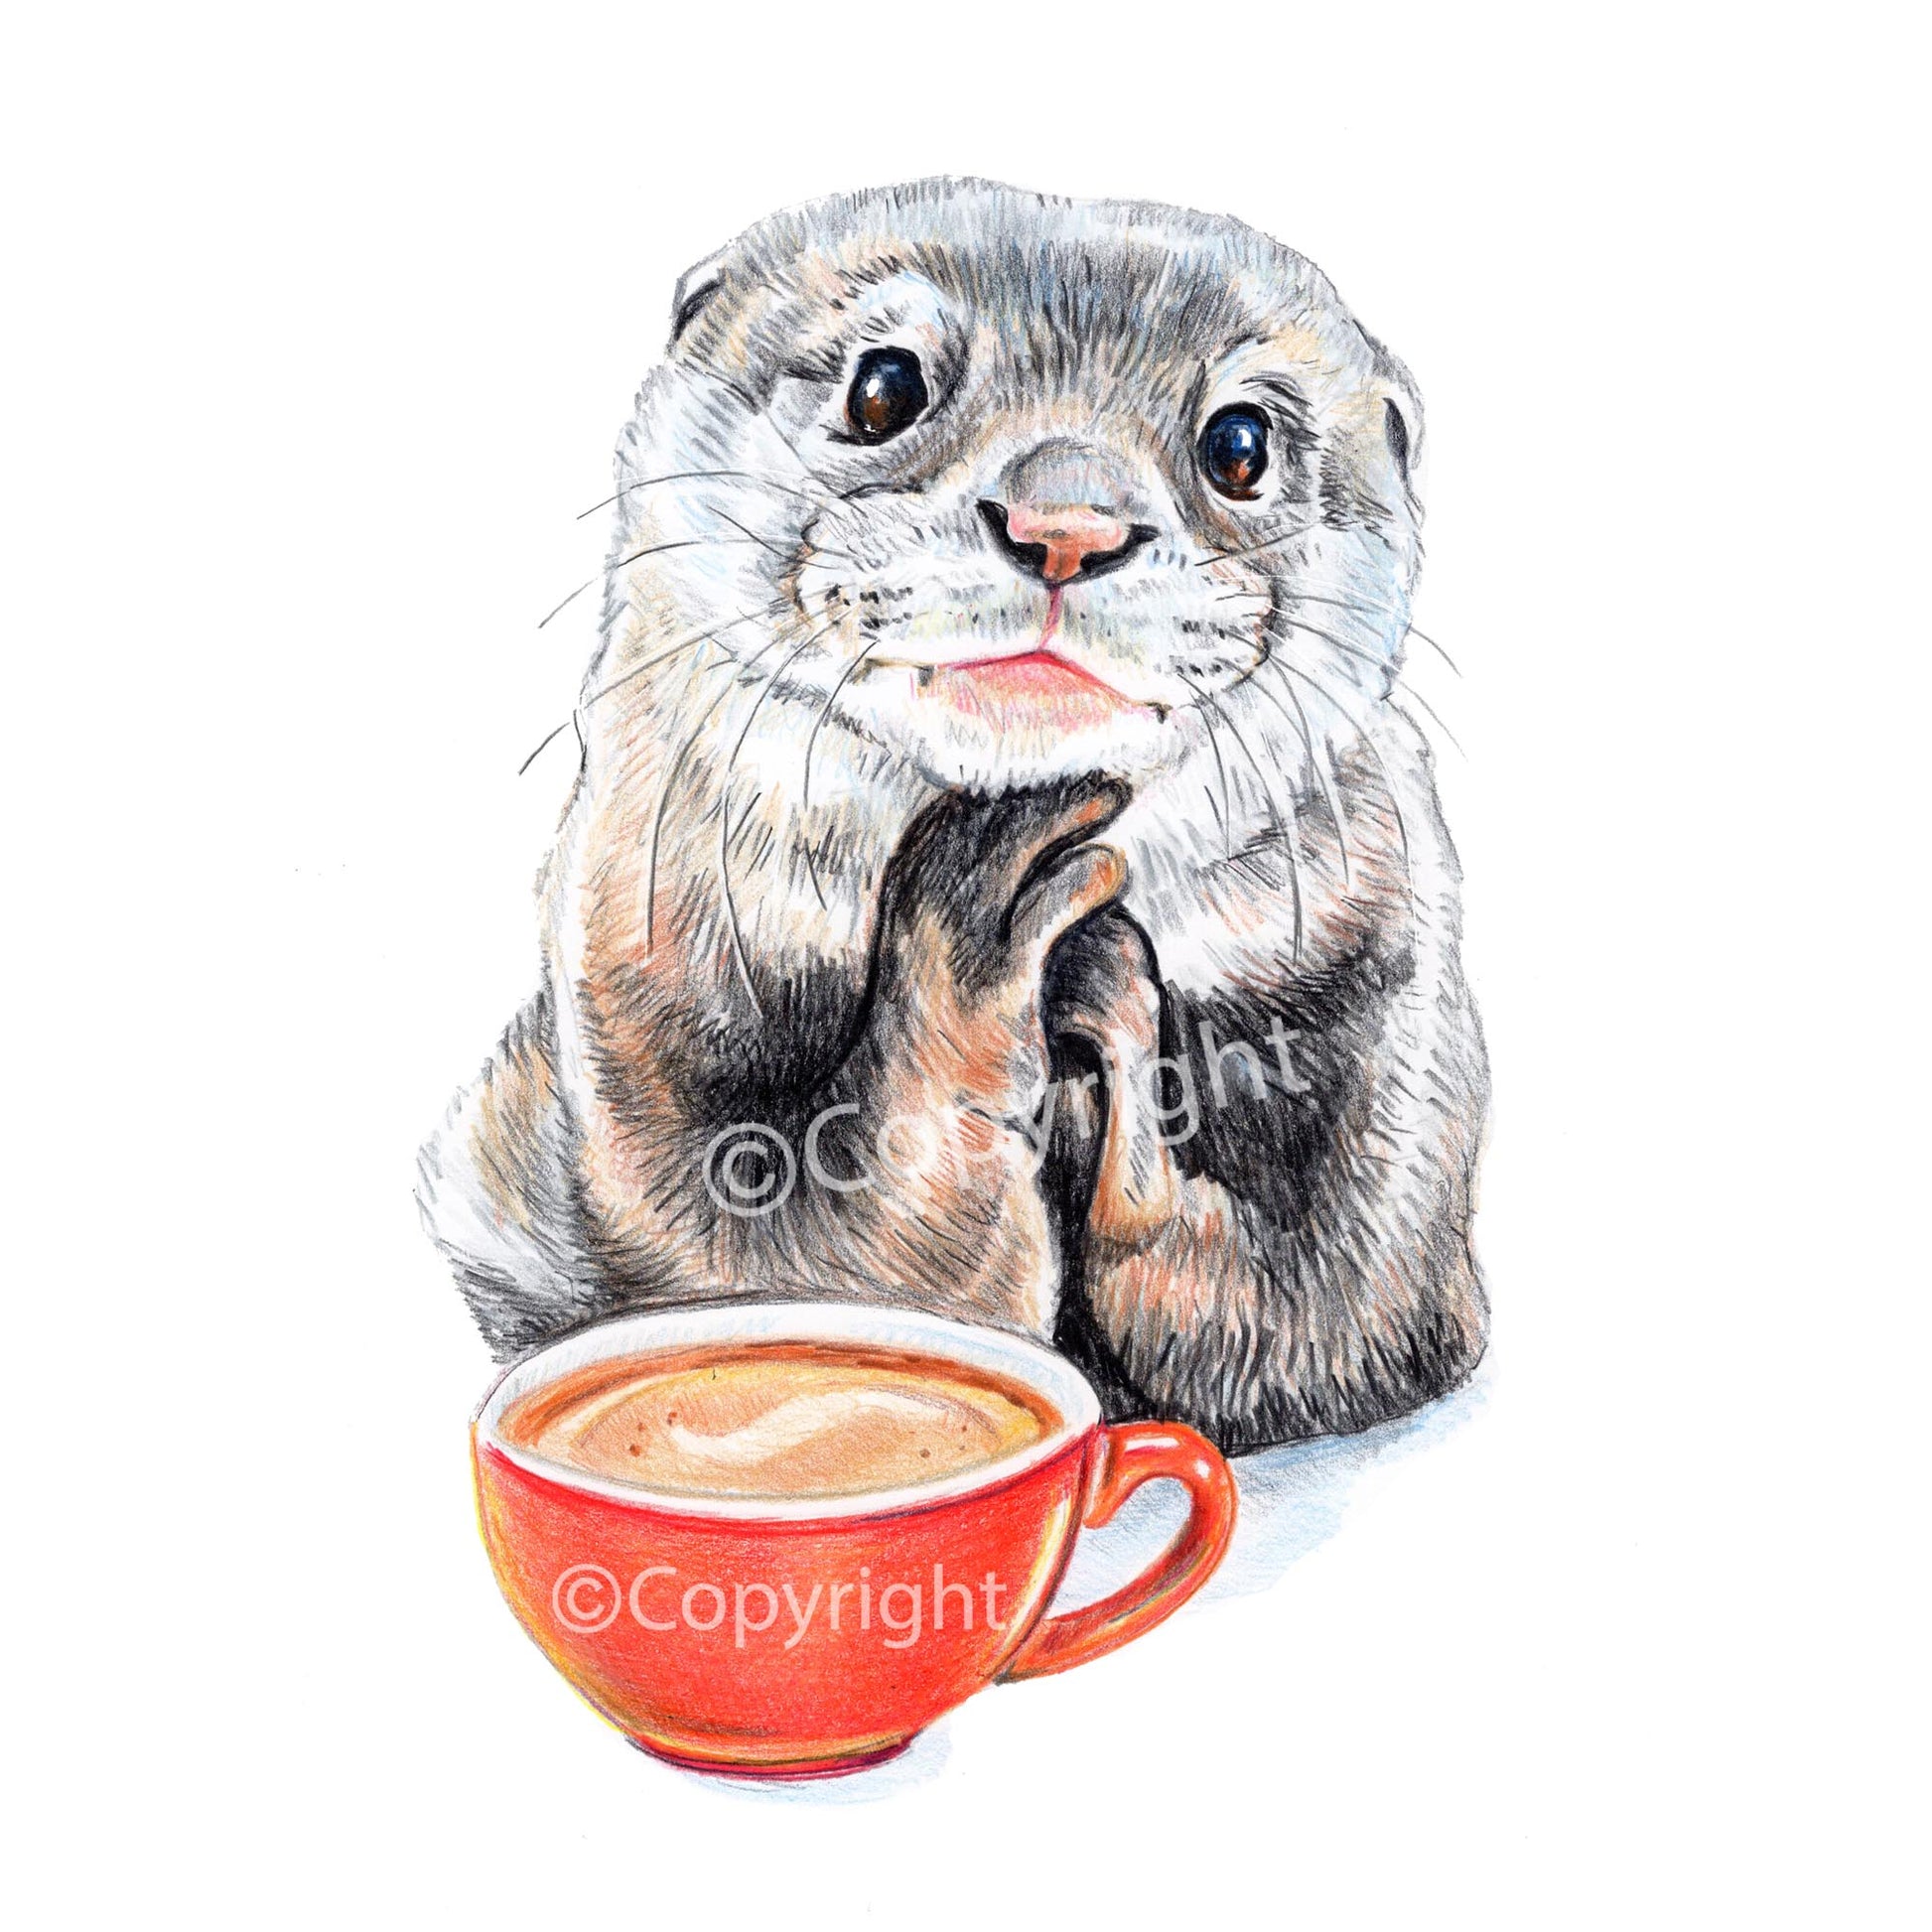 Drawing of a day dreaming otter at a coffee shop by Deidre Wicks